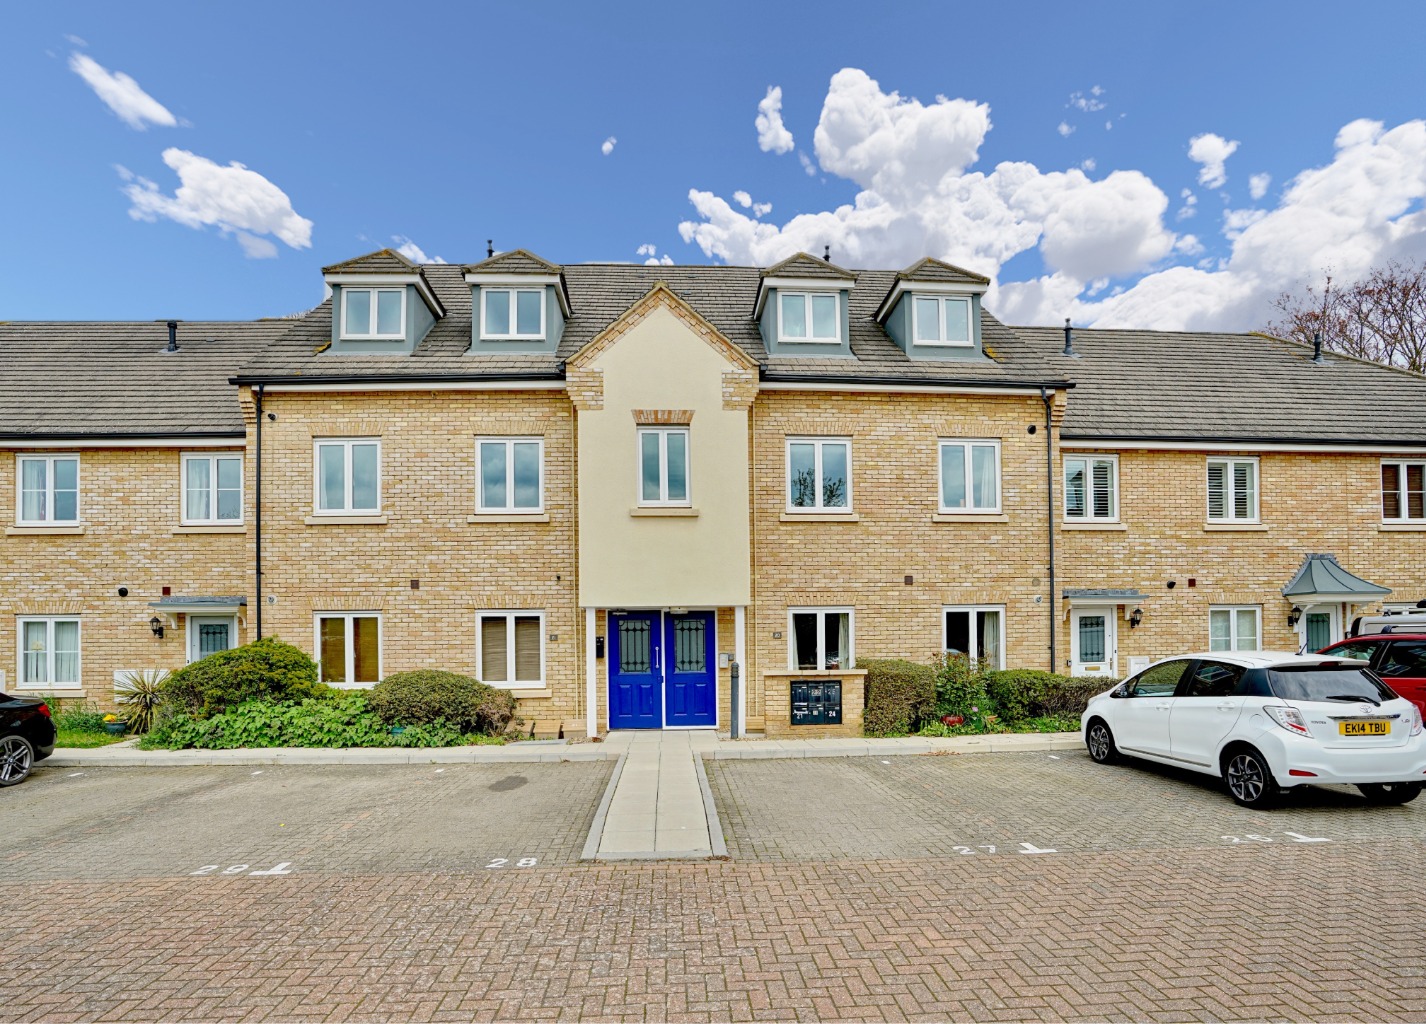 2 bed flat for sale in Leas Close, St Ives - Property Image 1